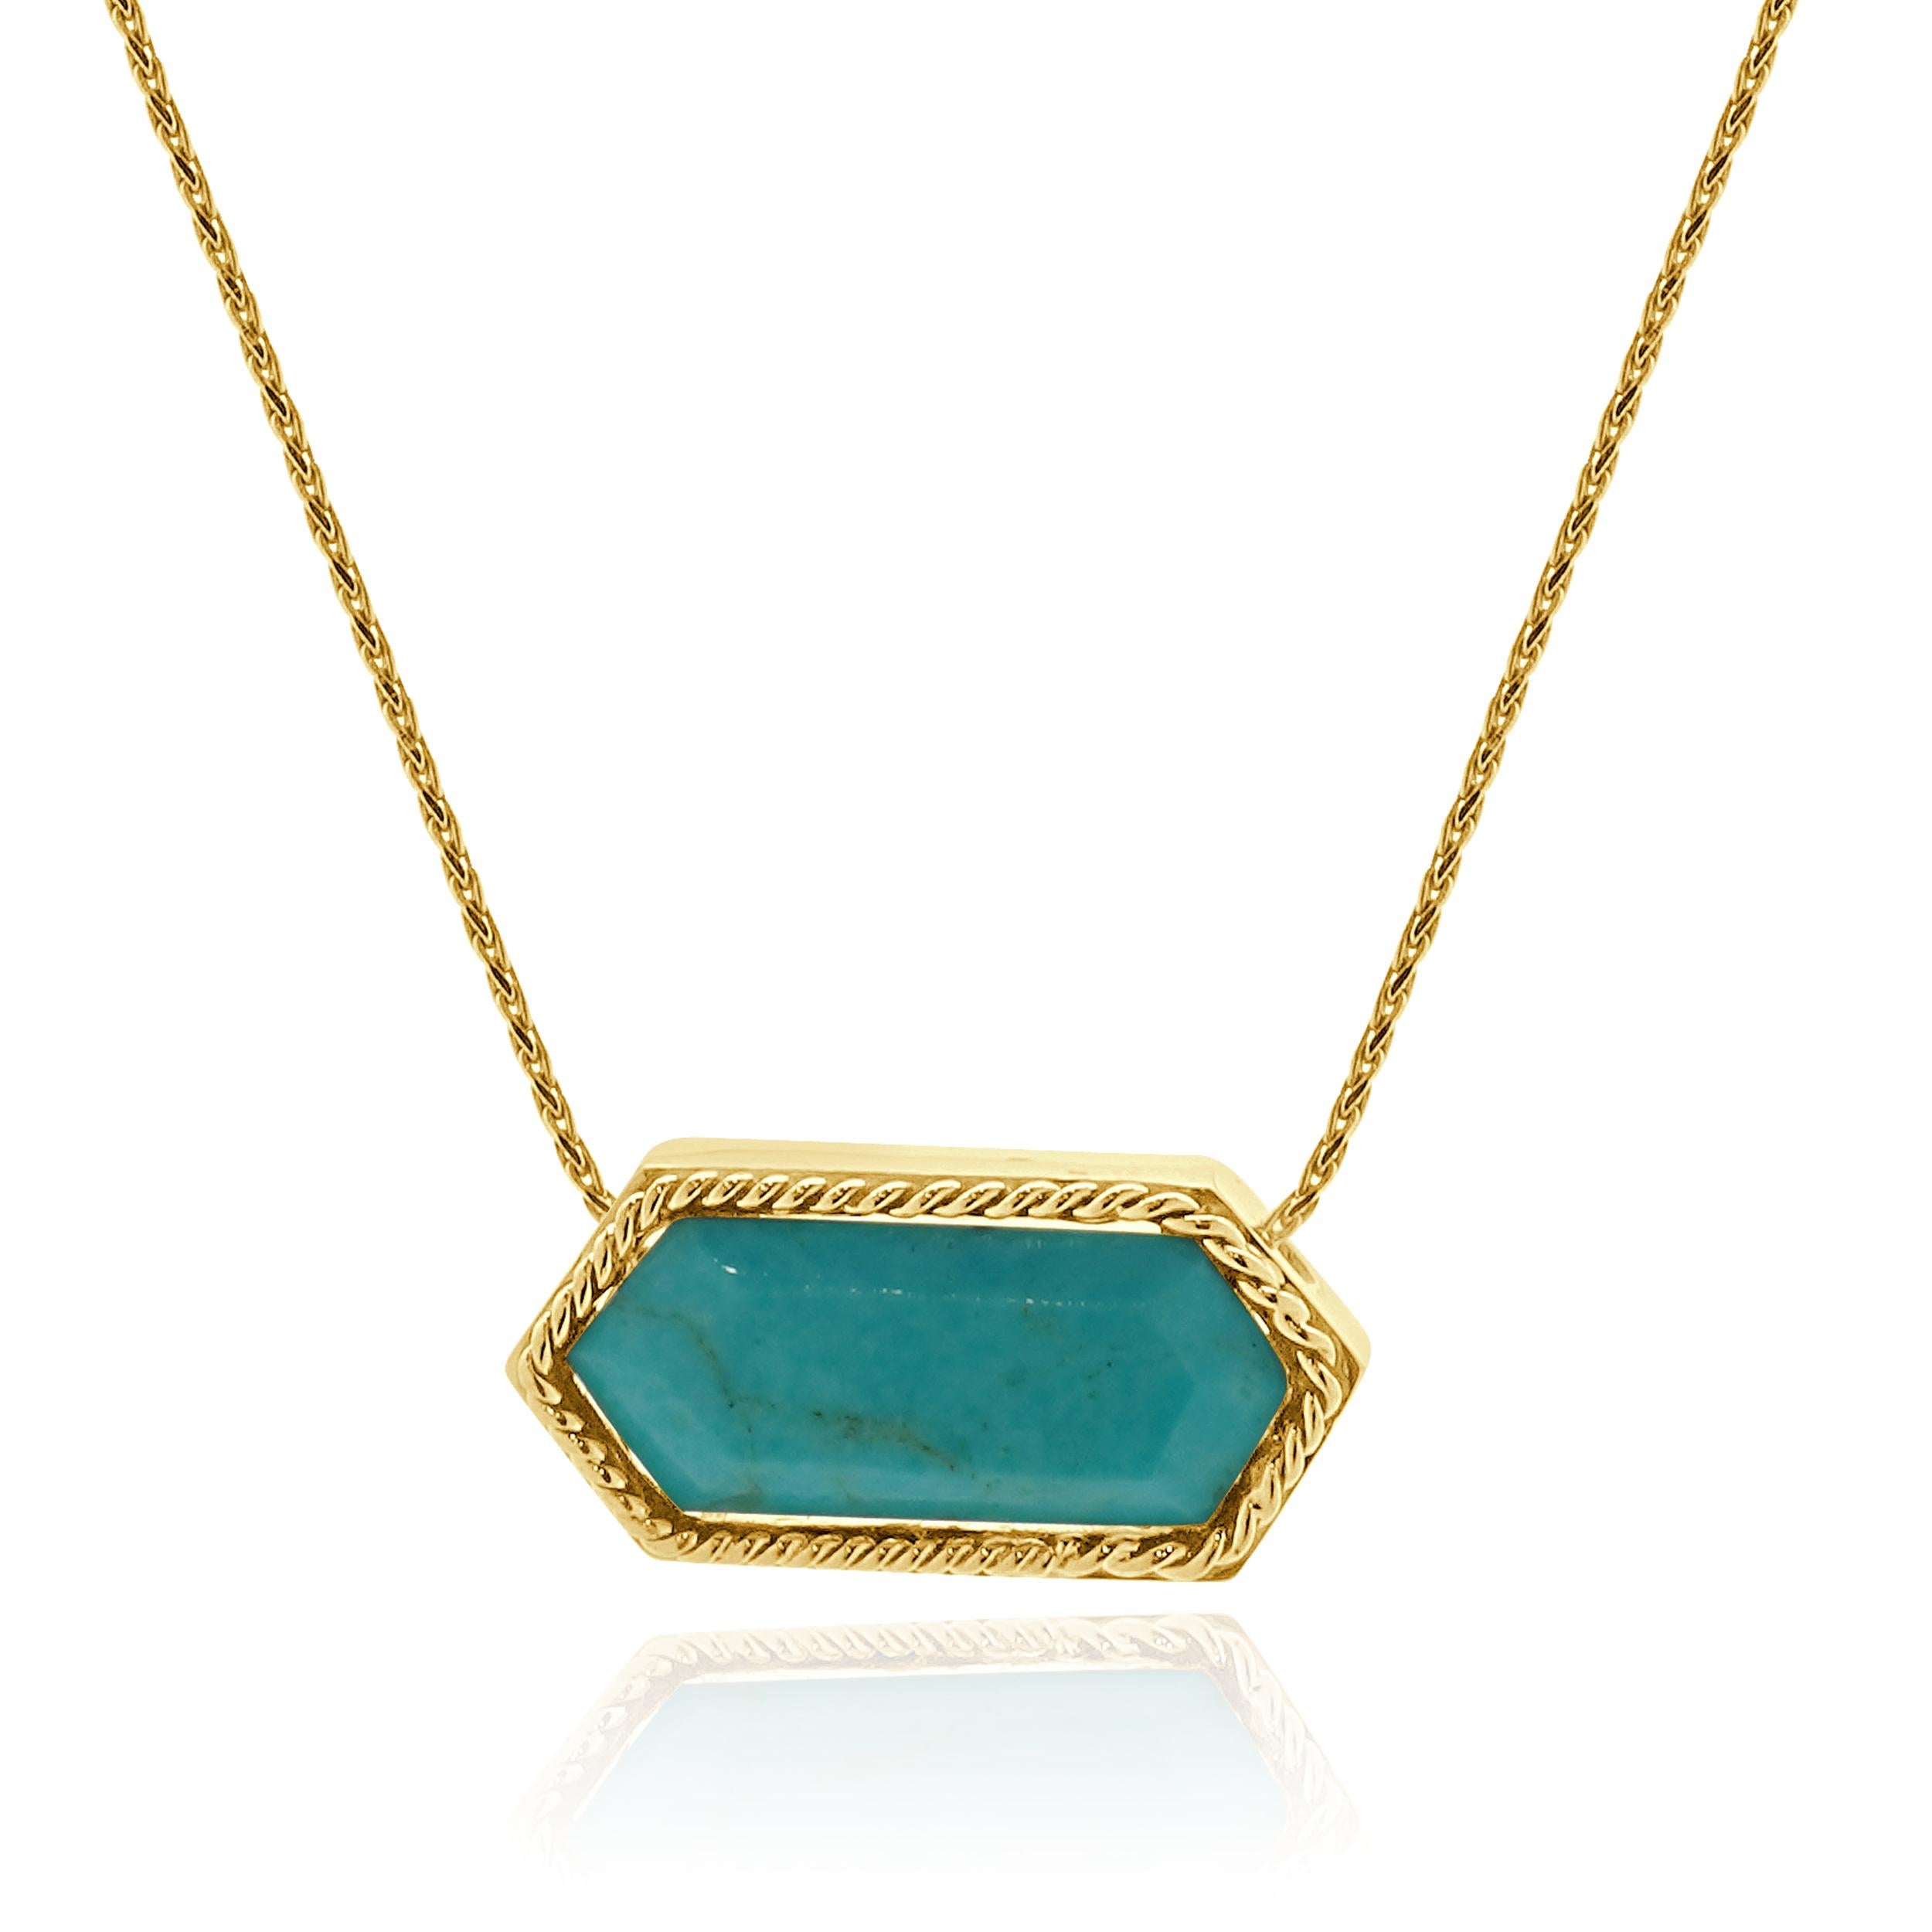 Designer: custom
Material: 14K yellow gold
Dimensions: necklace measures 18-inches in length
Weight: 8.23 grams
